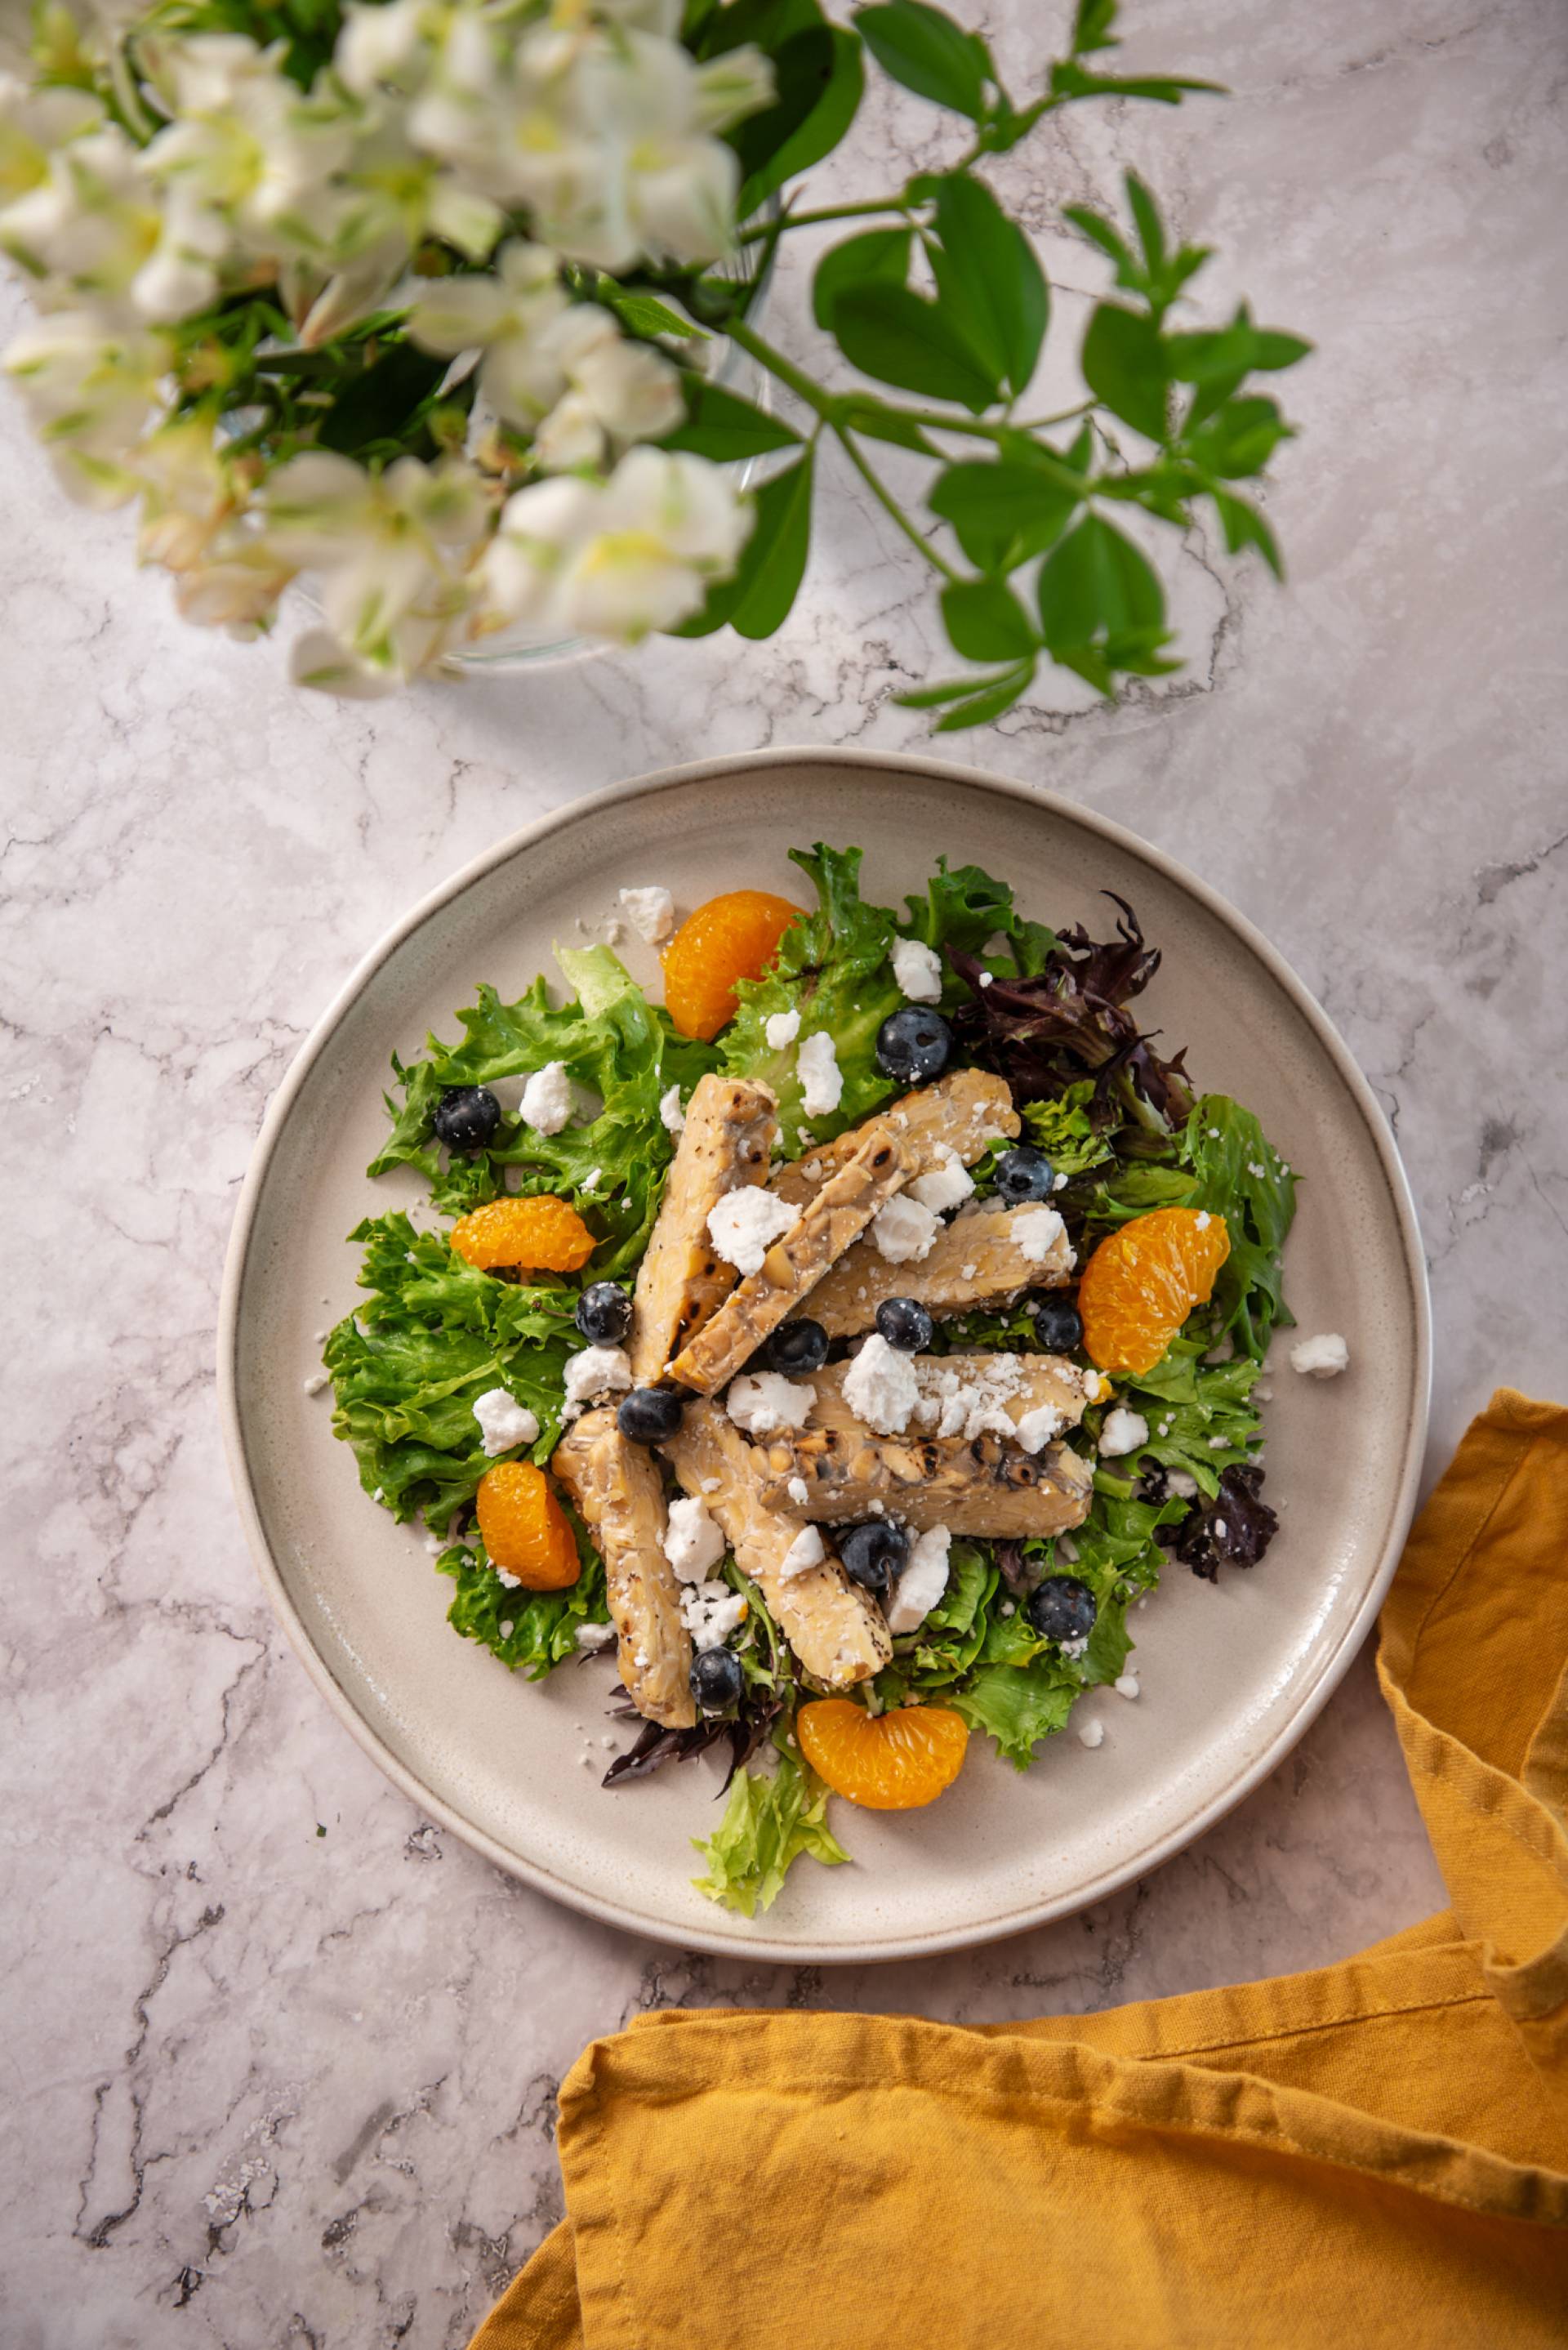 Grilled Tempeh Salad with Blueberry Vinaigrette (Meat-Free)